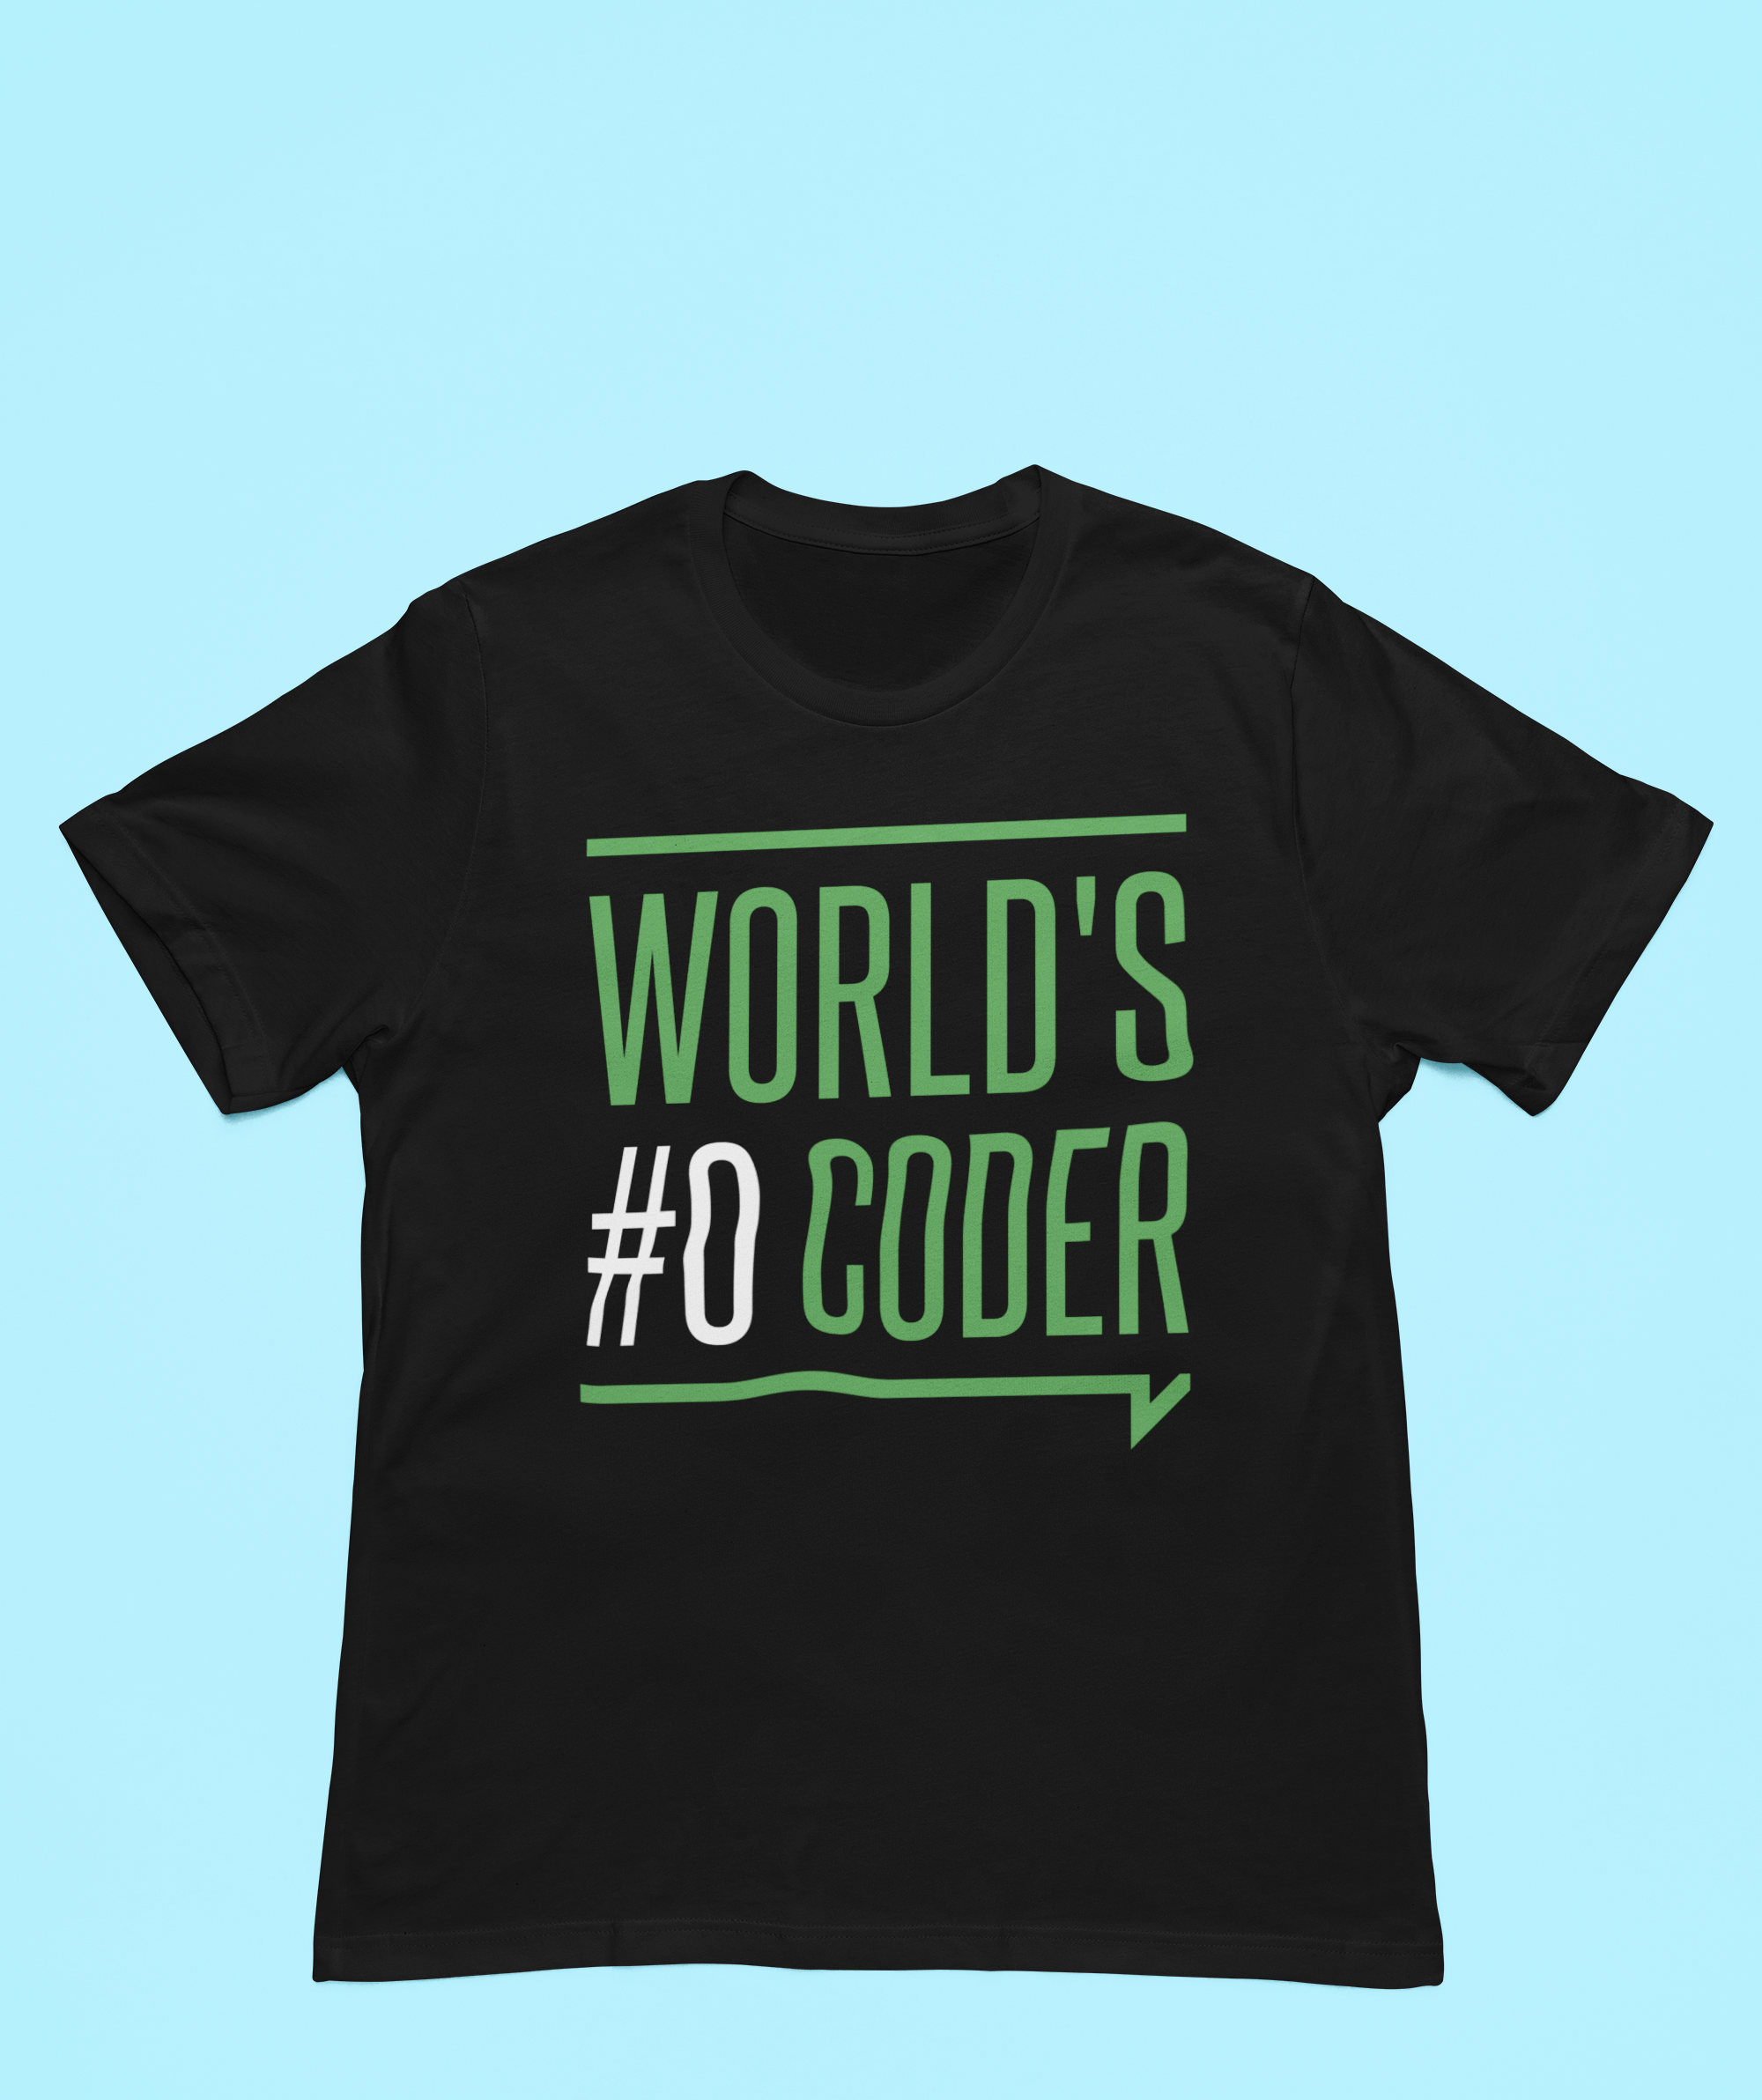 World's #0 Coder T-Shirt with the text "World's #0 Coder" printed in green, admired by coding peers.